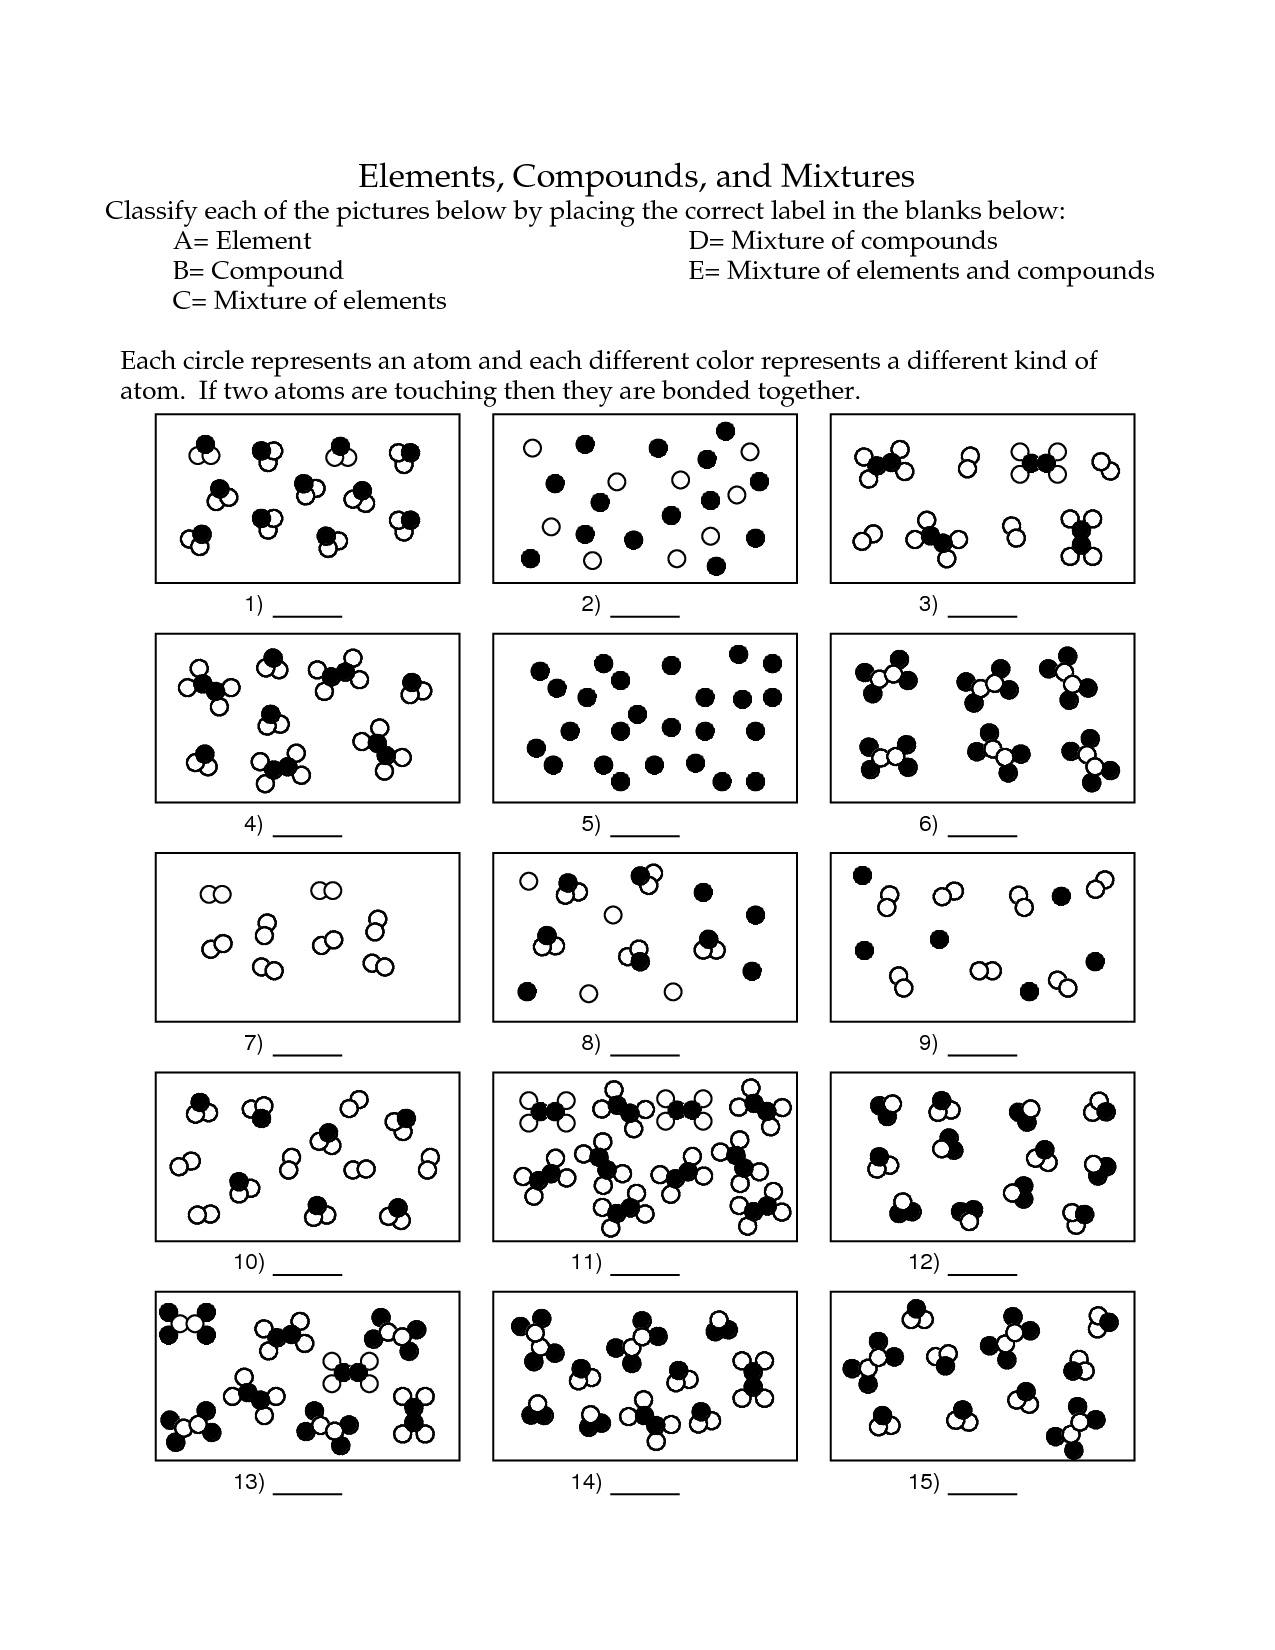 17 Best Images of Elements Compounds And Mixtures Worksheet Answer Key